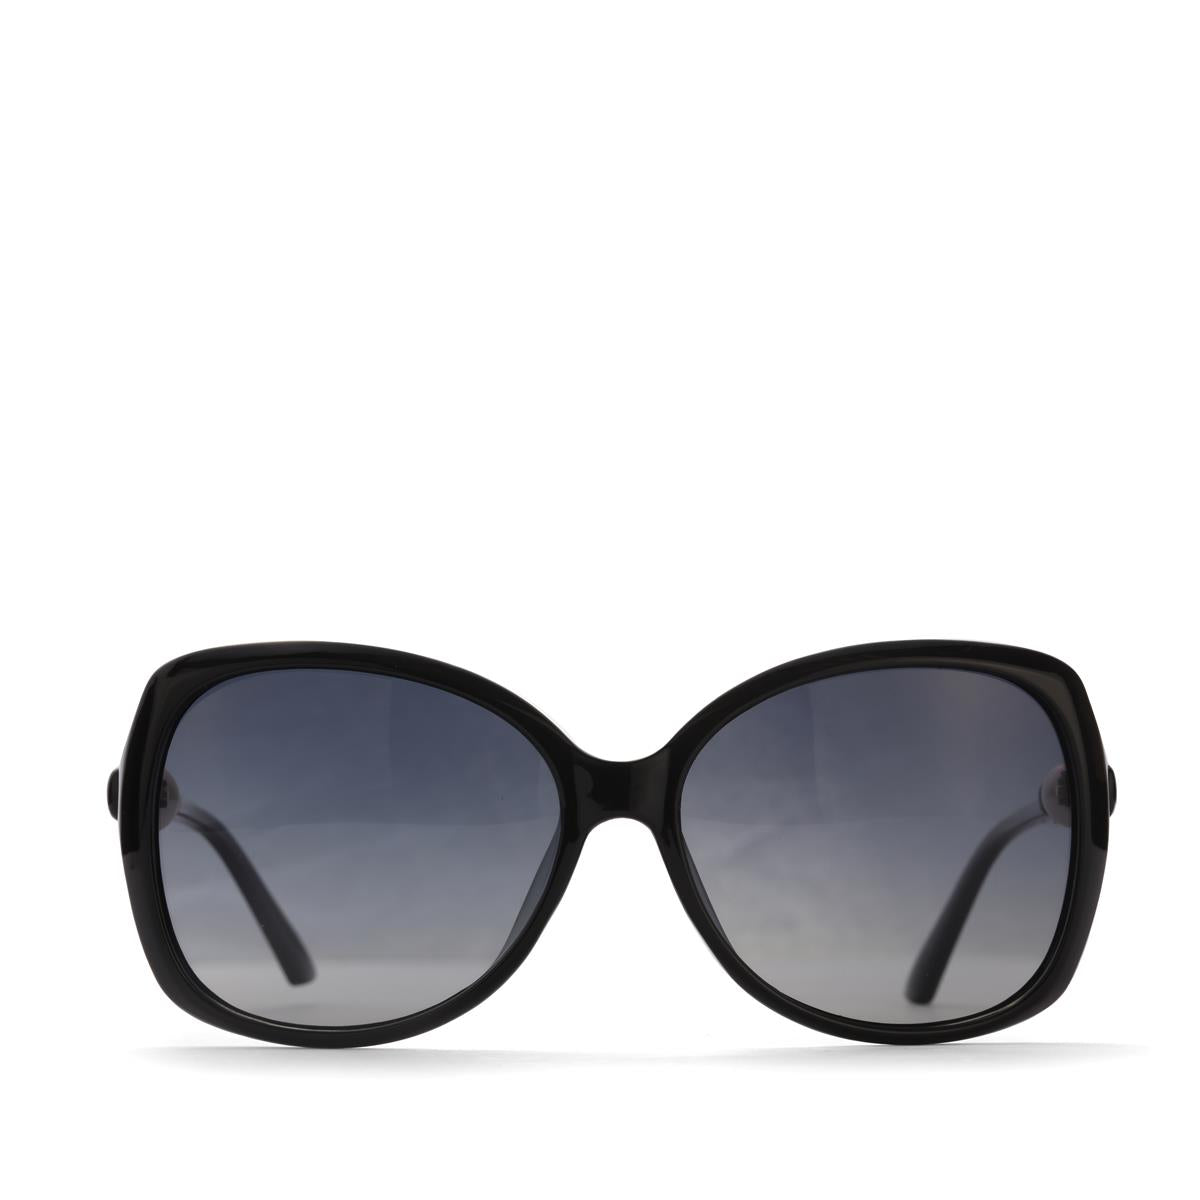 Gemporia: Black Framed Polarised/UV400 Sunglasses with Black Obsidian and Freshwater Pearl ATGW 5.04cts